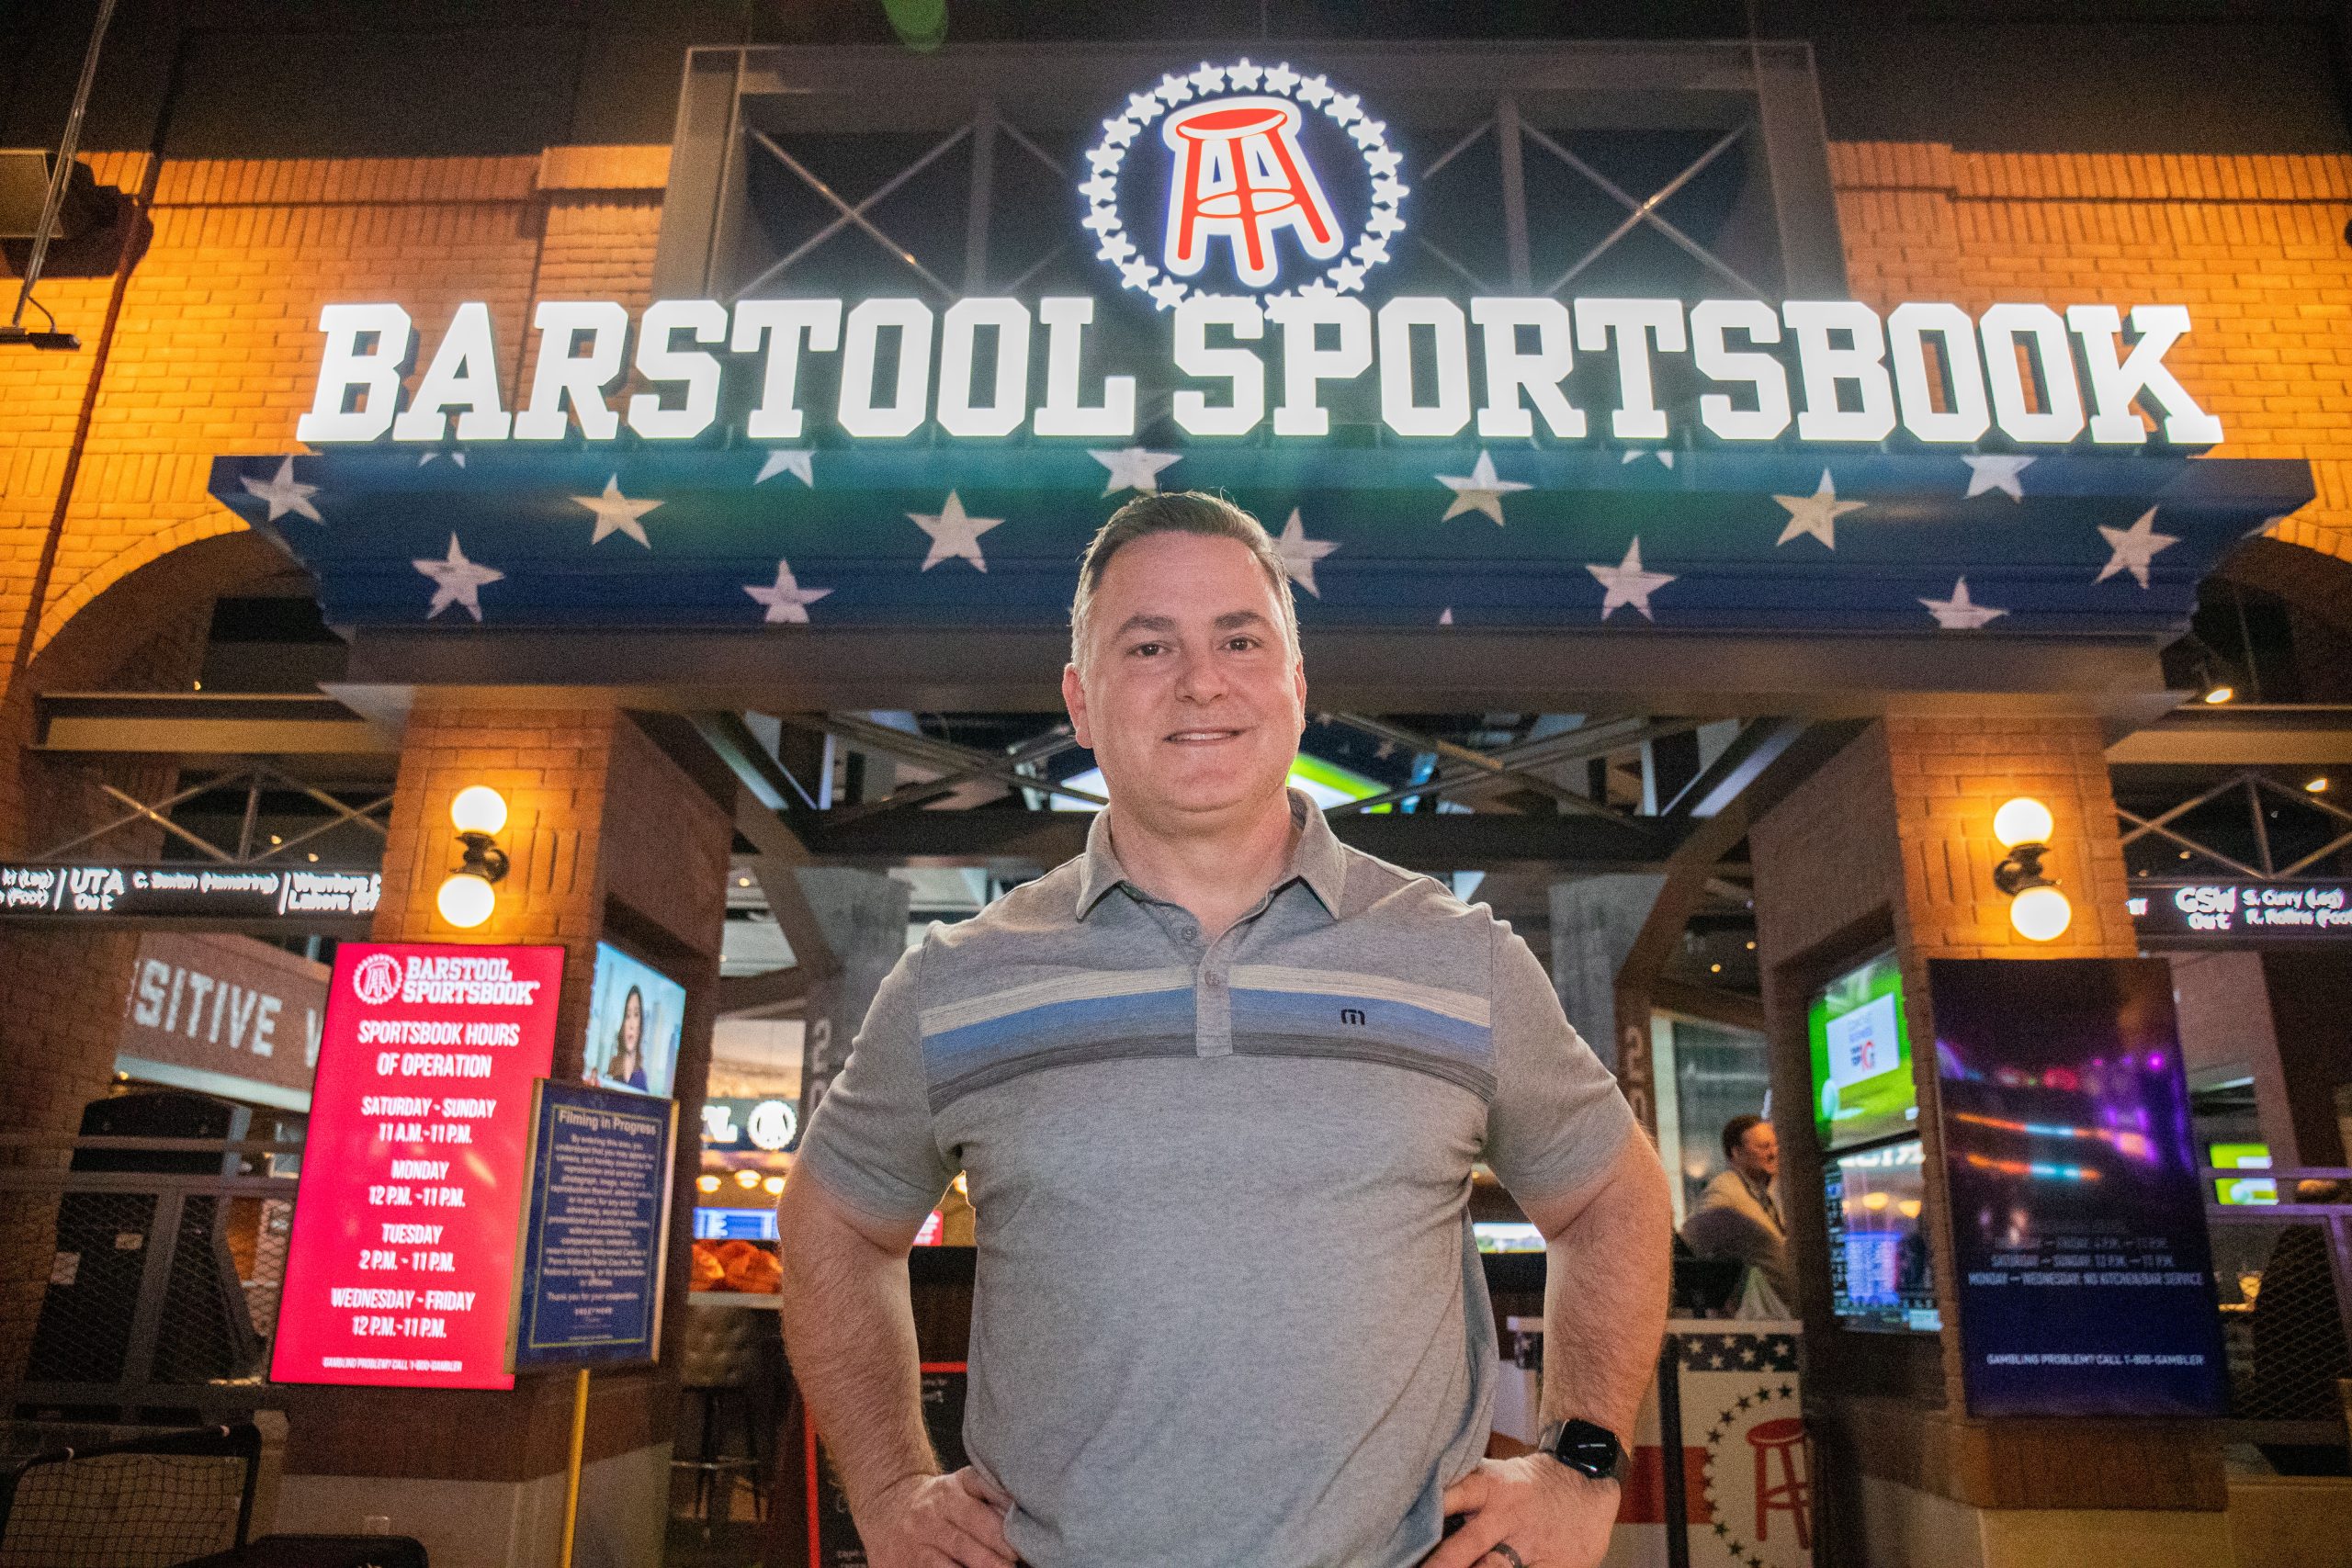 Barstool Sportsbook’s entertainment experience attracts seasoned bettors and new customers